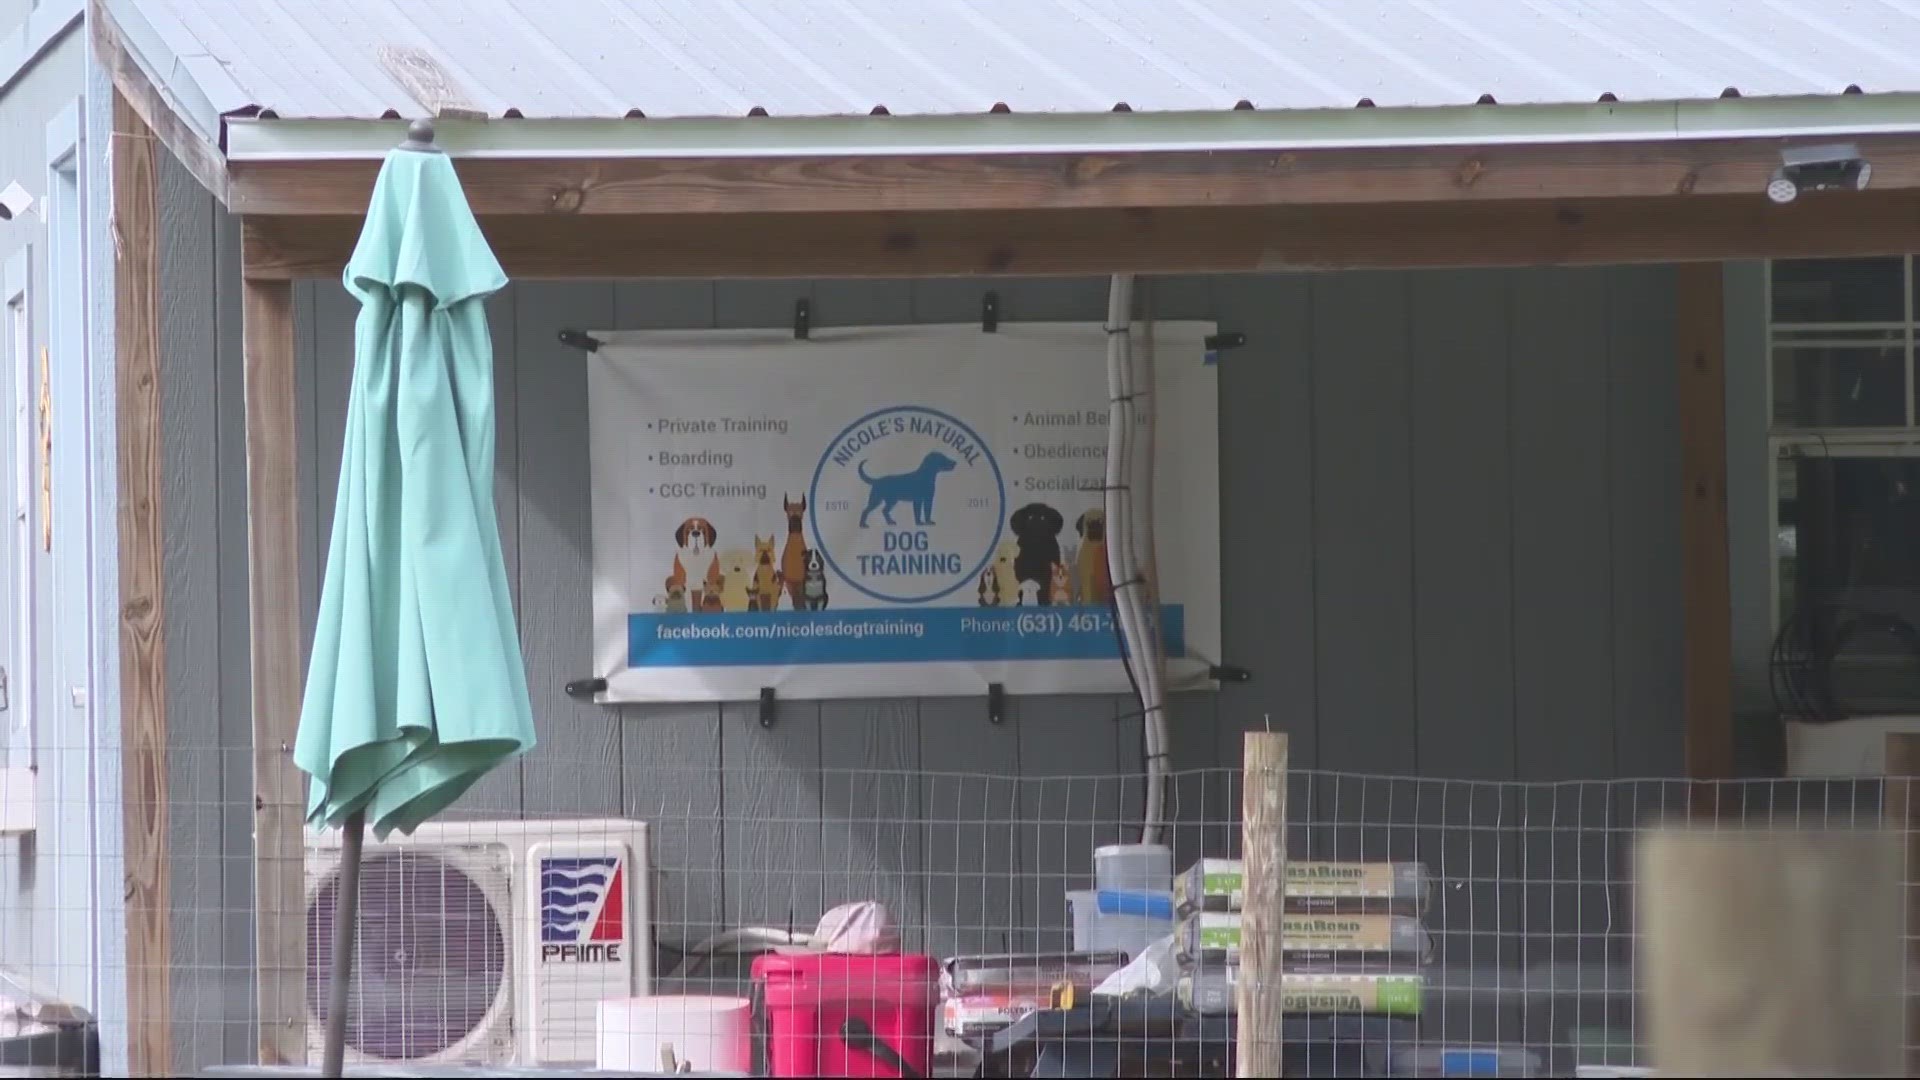 The owner of Nicole's Natural Dog Training in Columbia County said in a video on her Facebook page that an air conditioning outage led to the death of 12 dogs.